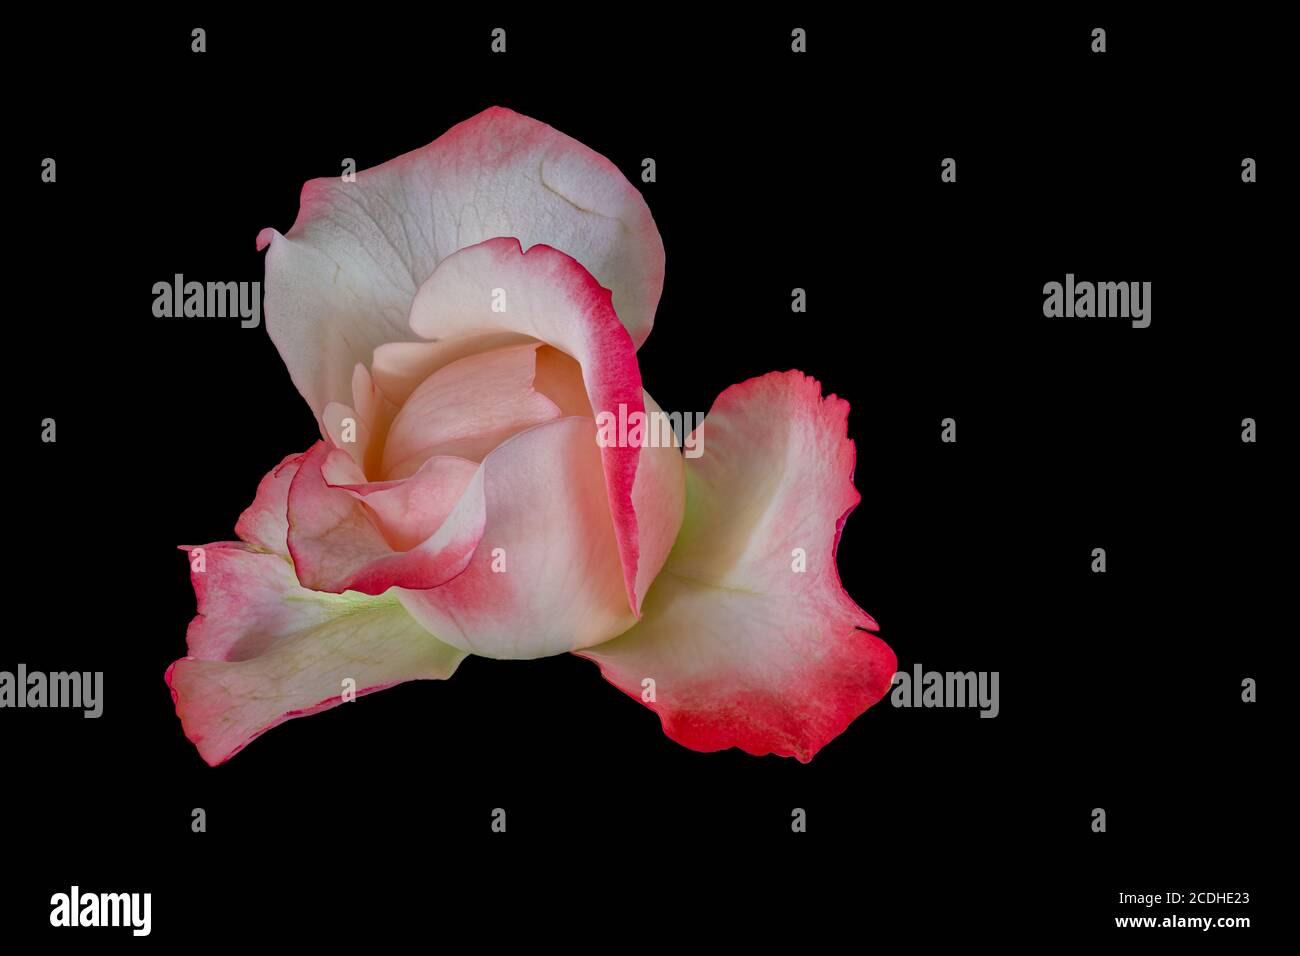 bright pink white young rose blossom heart macro on black background, single isolated bloom, detailed texture Stock Photo